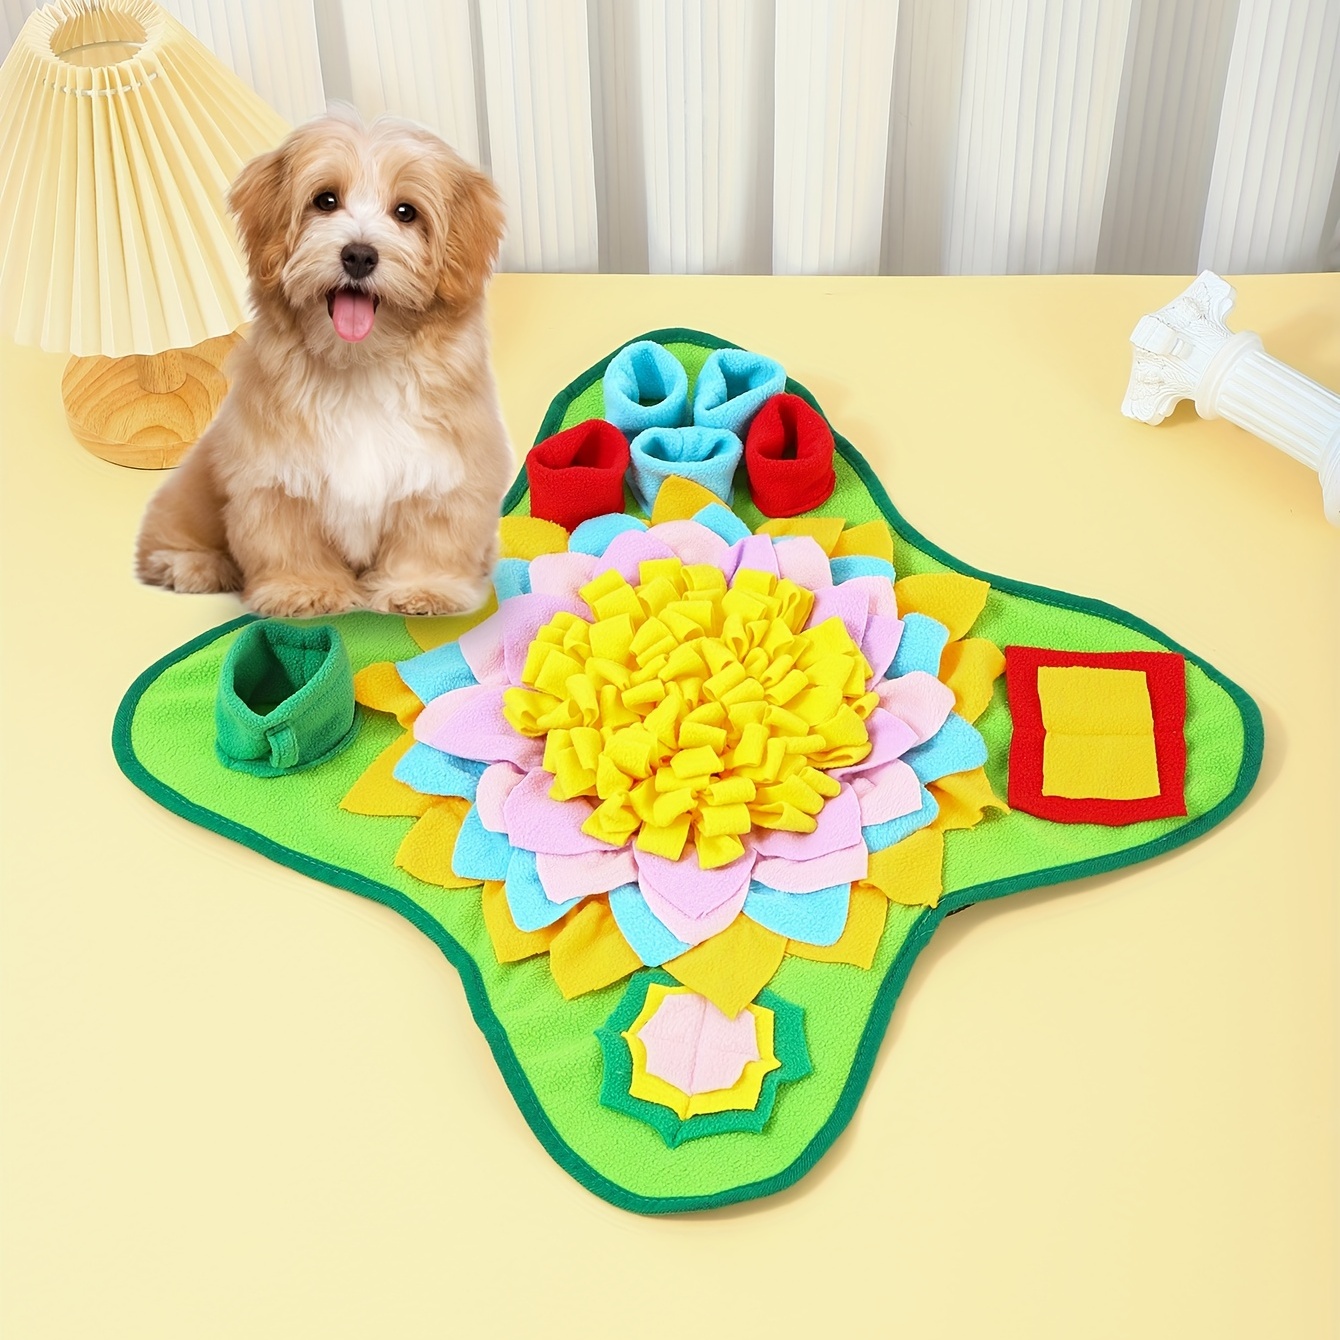 Interactive Dog Toys to Stimulate and Keep Your Dog Entertained - Snuffle  Mat for Dogs!